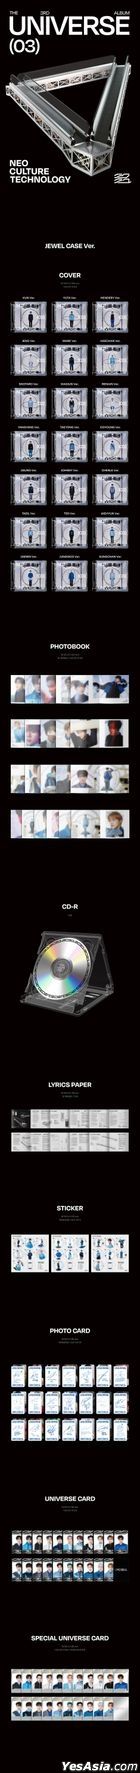 NCT Vol. 3 - Universe (Jewel Case Version) (Jung Woo Version) + Poster in Tube